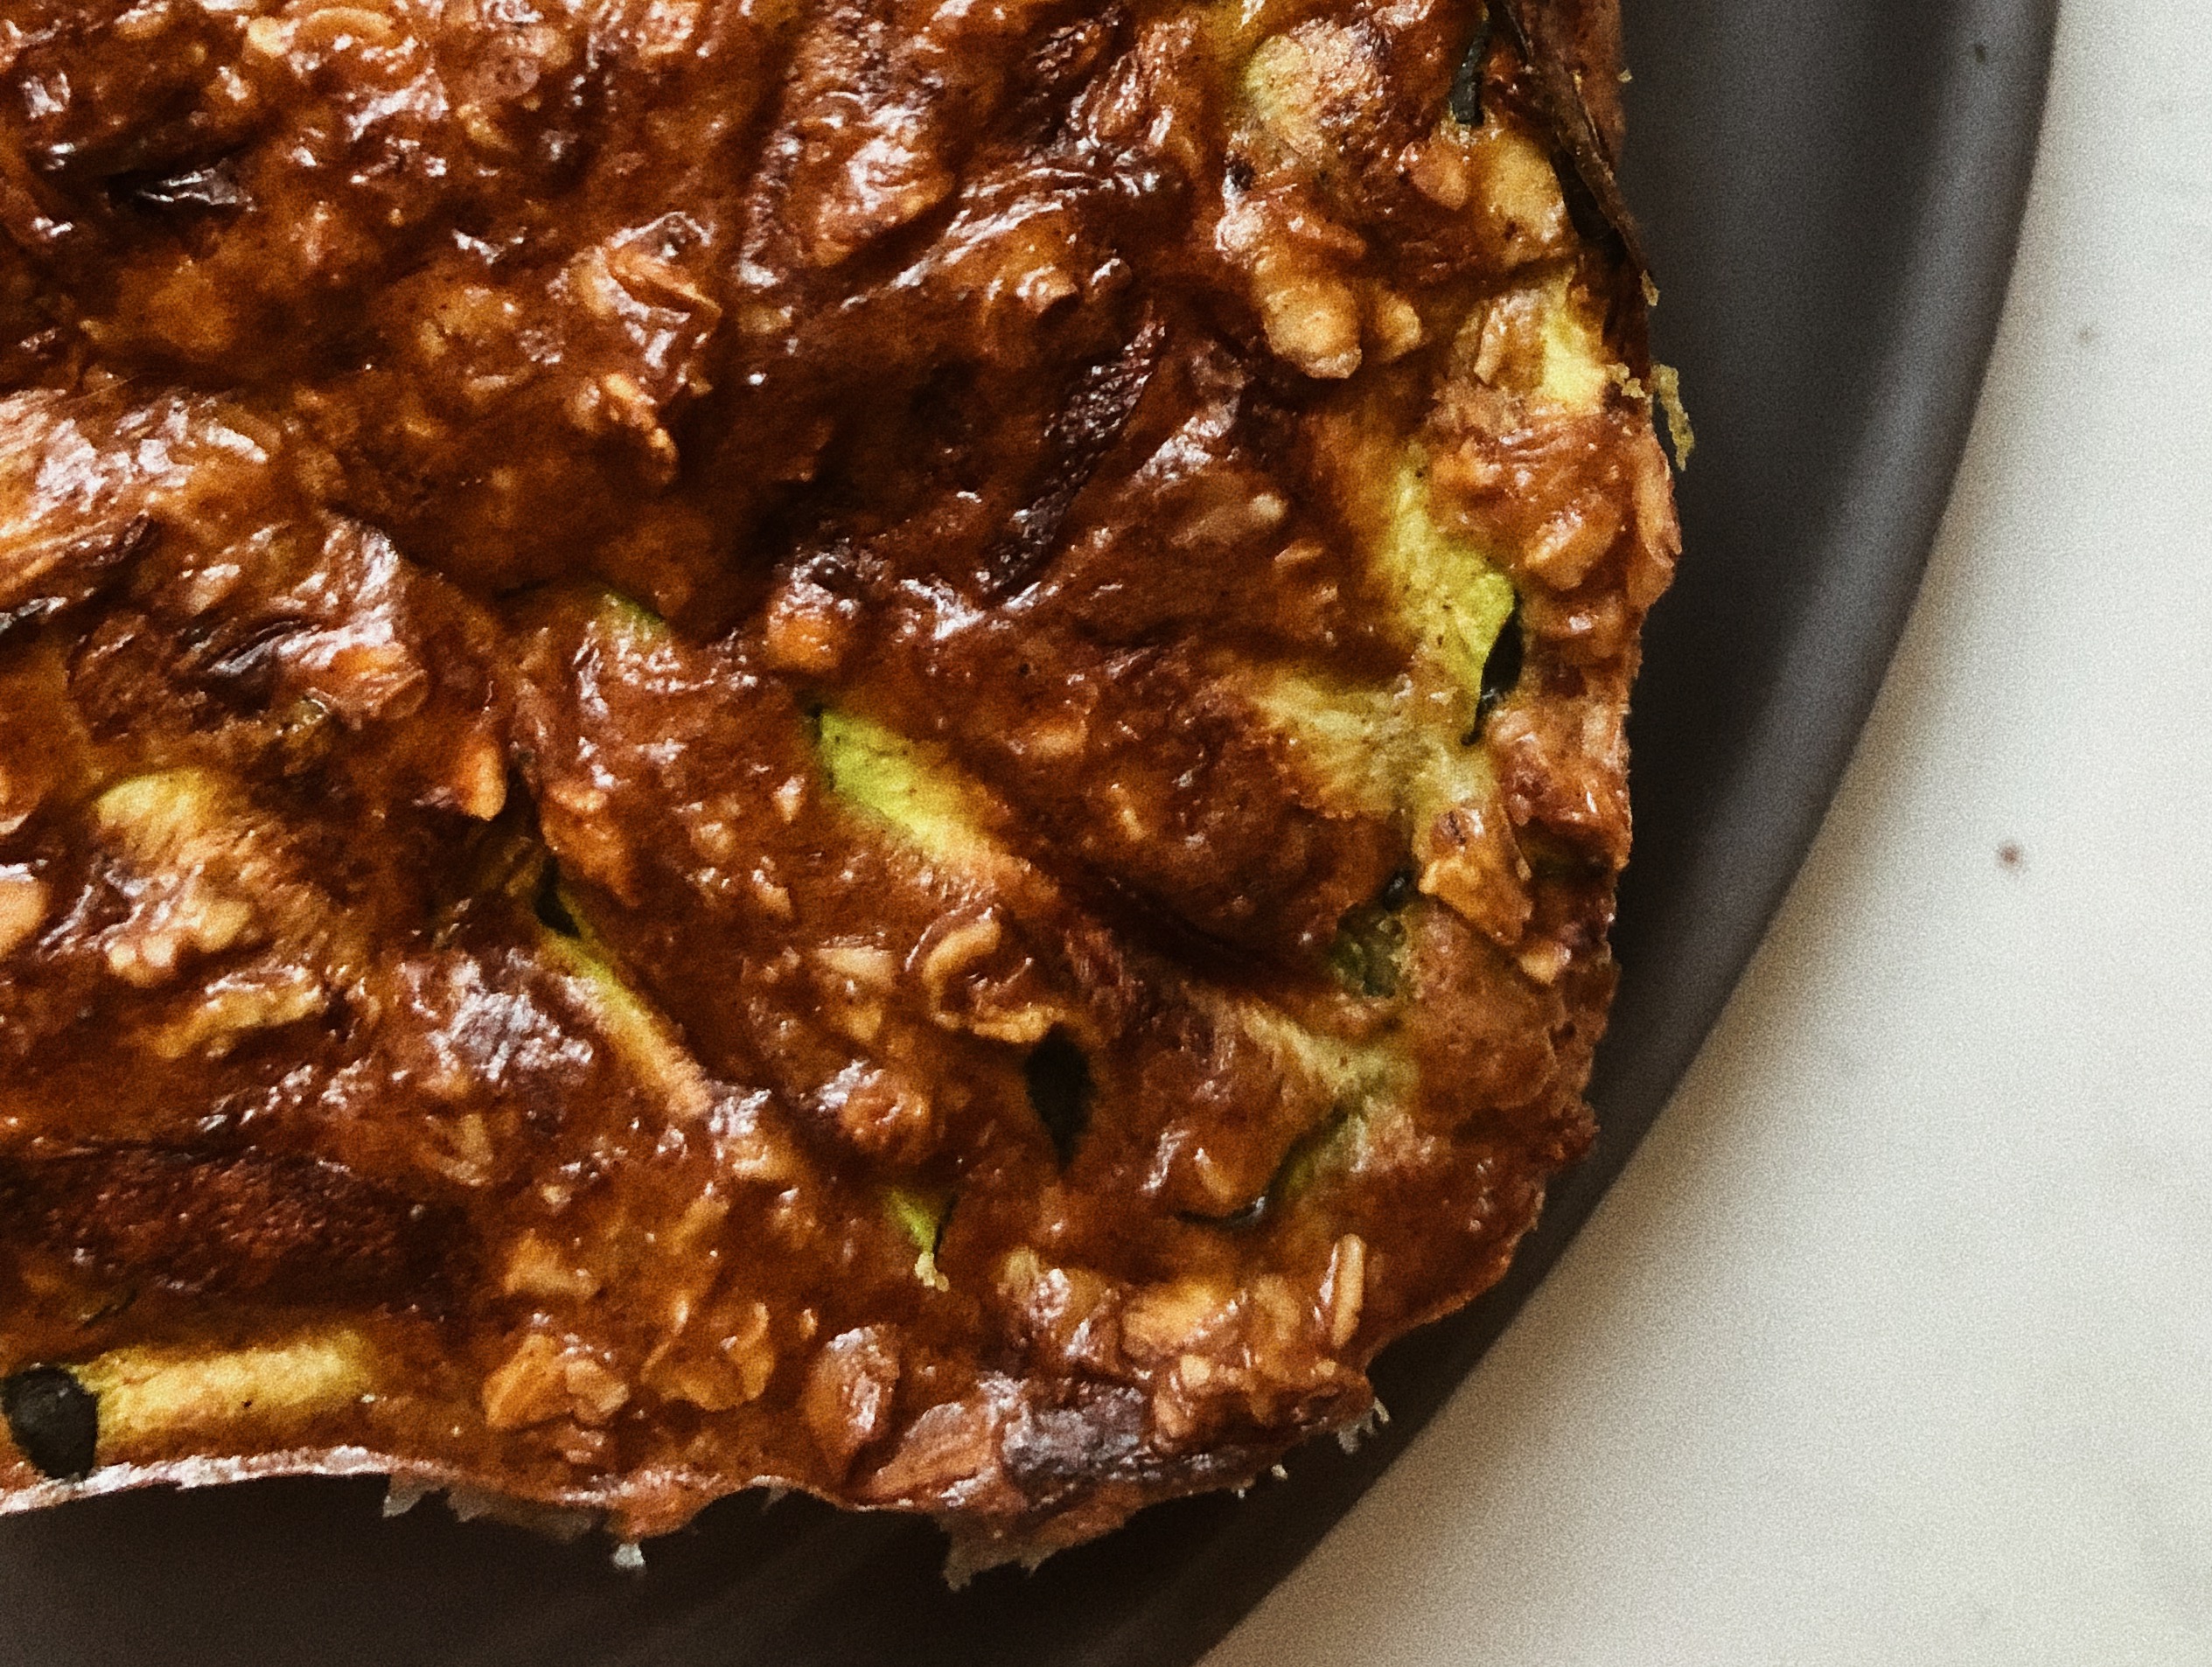 Baked Oatmeal with Turmeric, Coconut and Zucchini